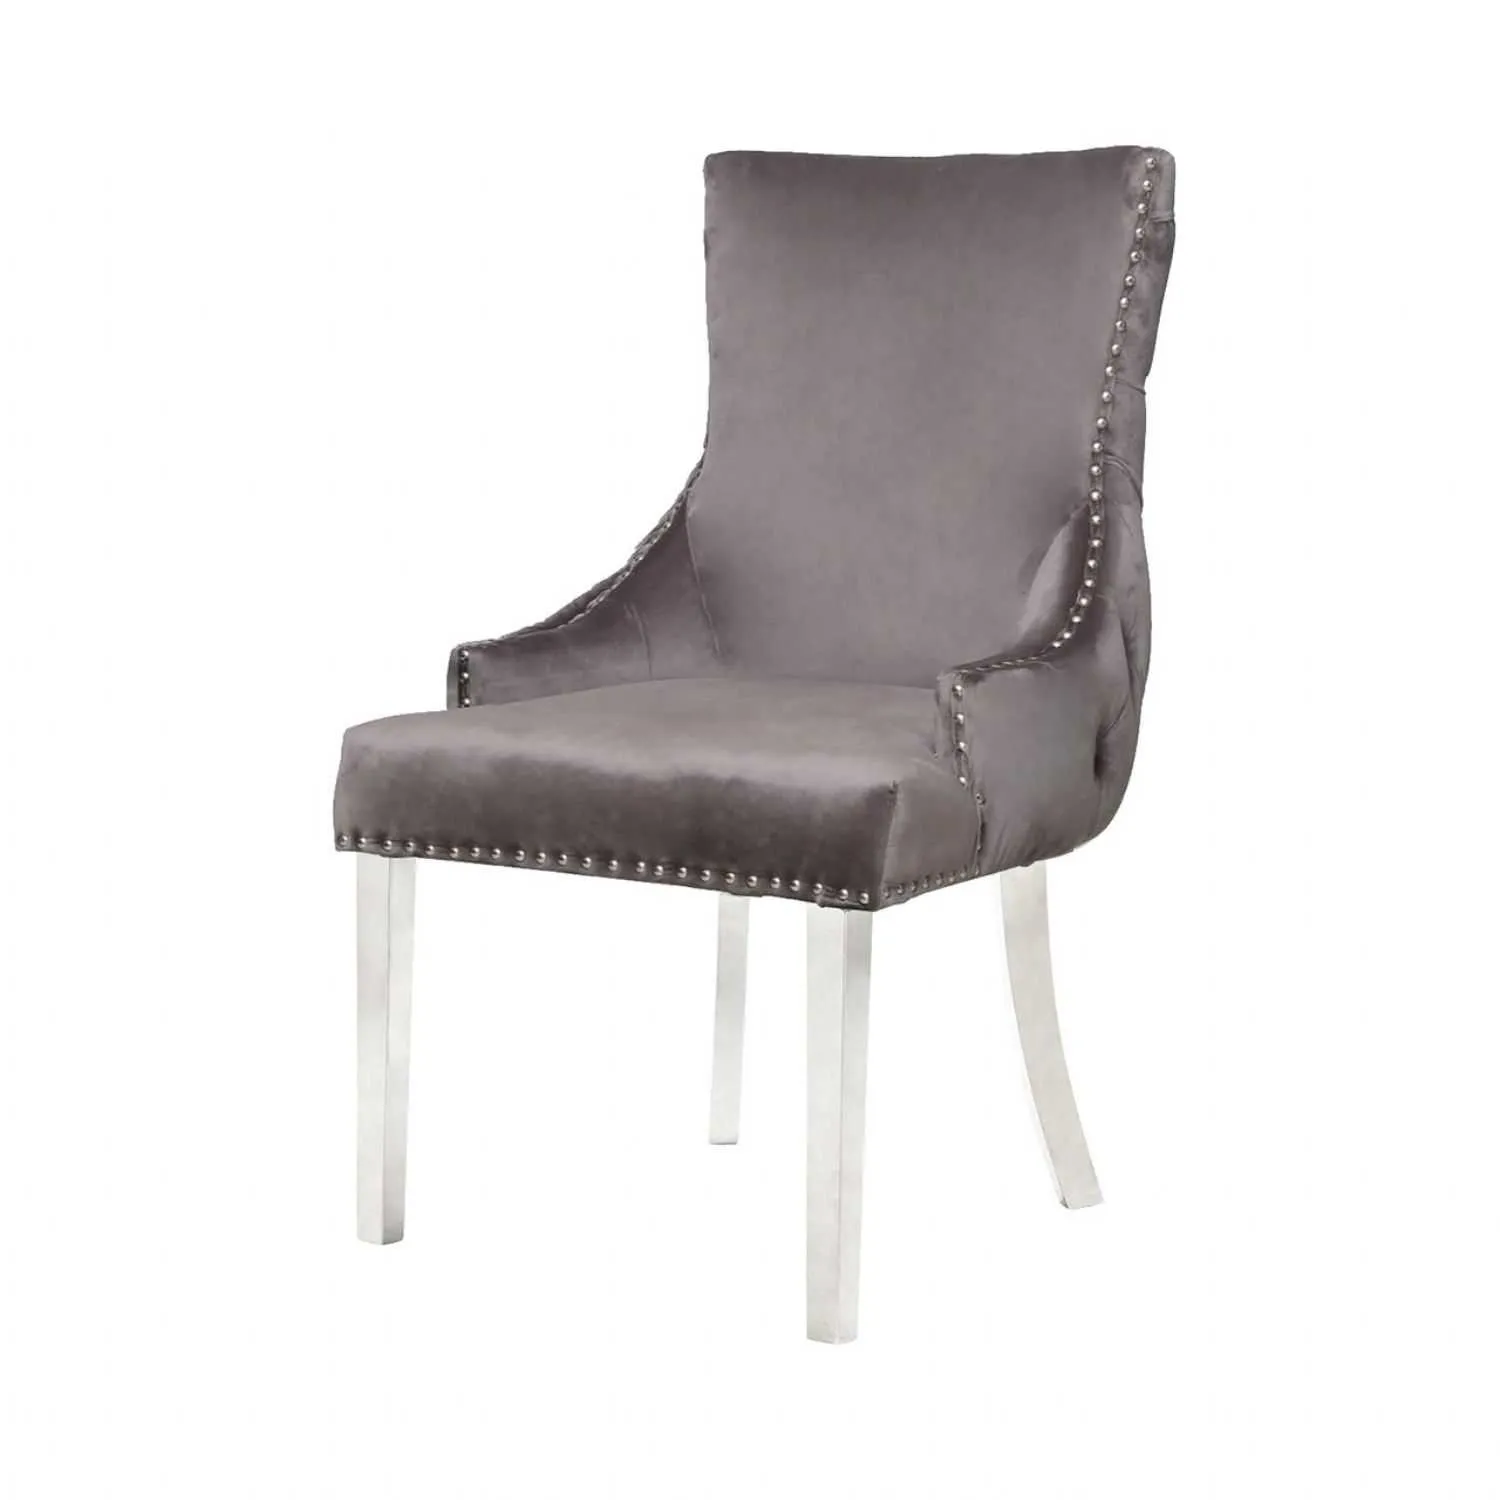 Tufted Back Dining Chair Grey